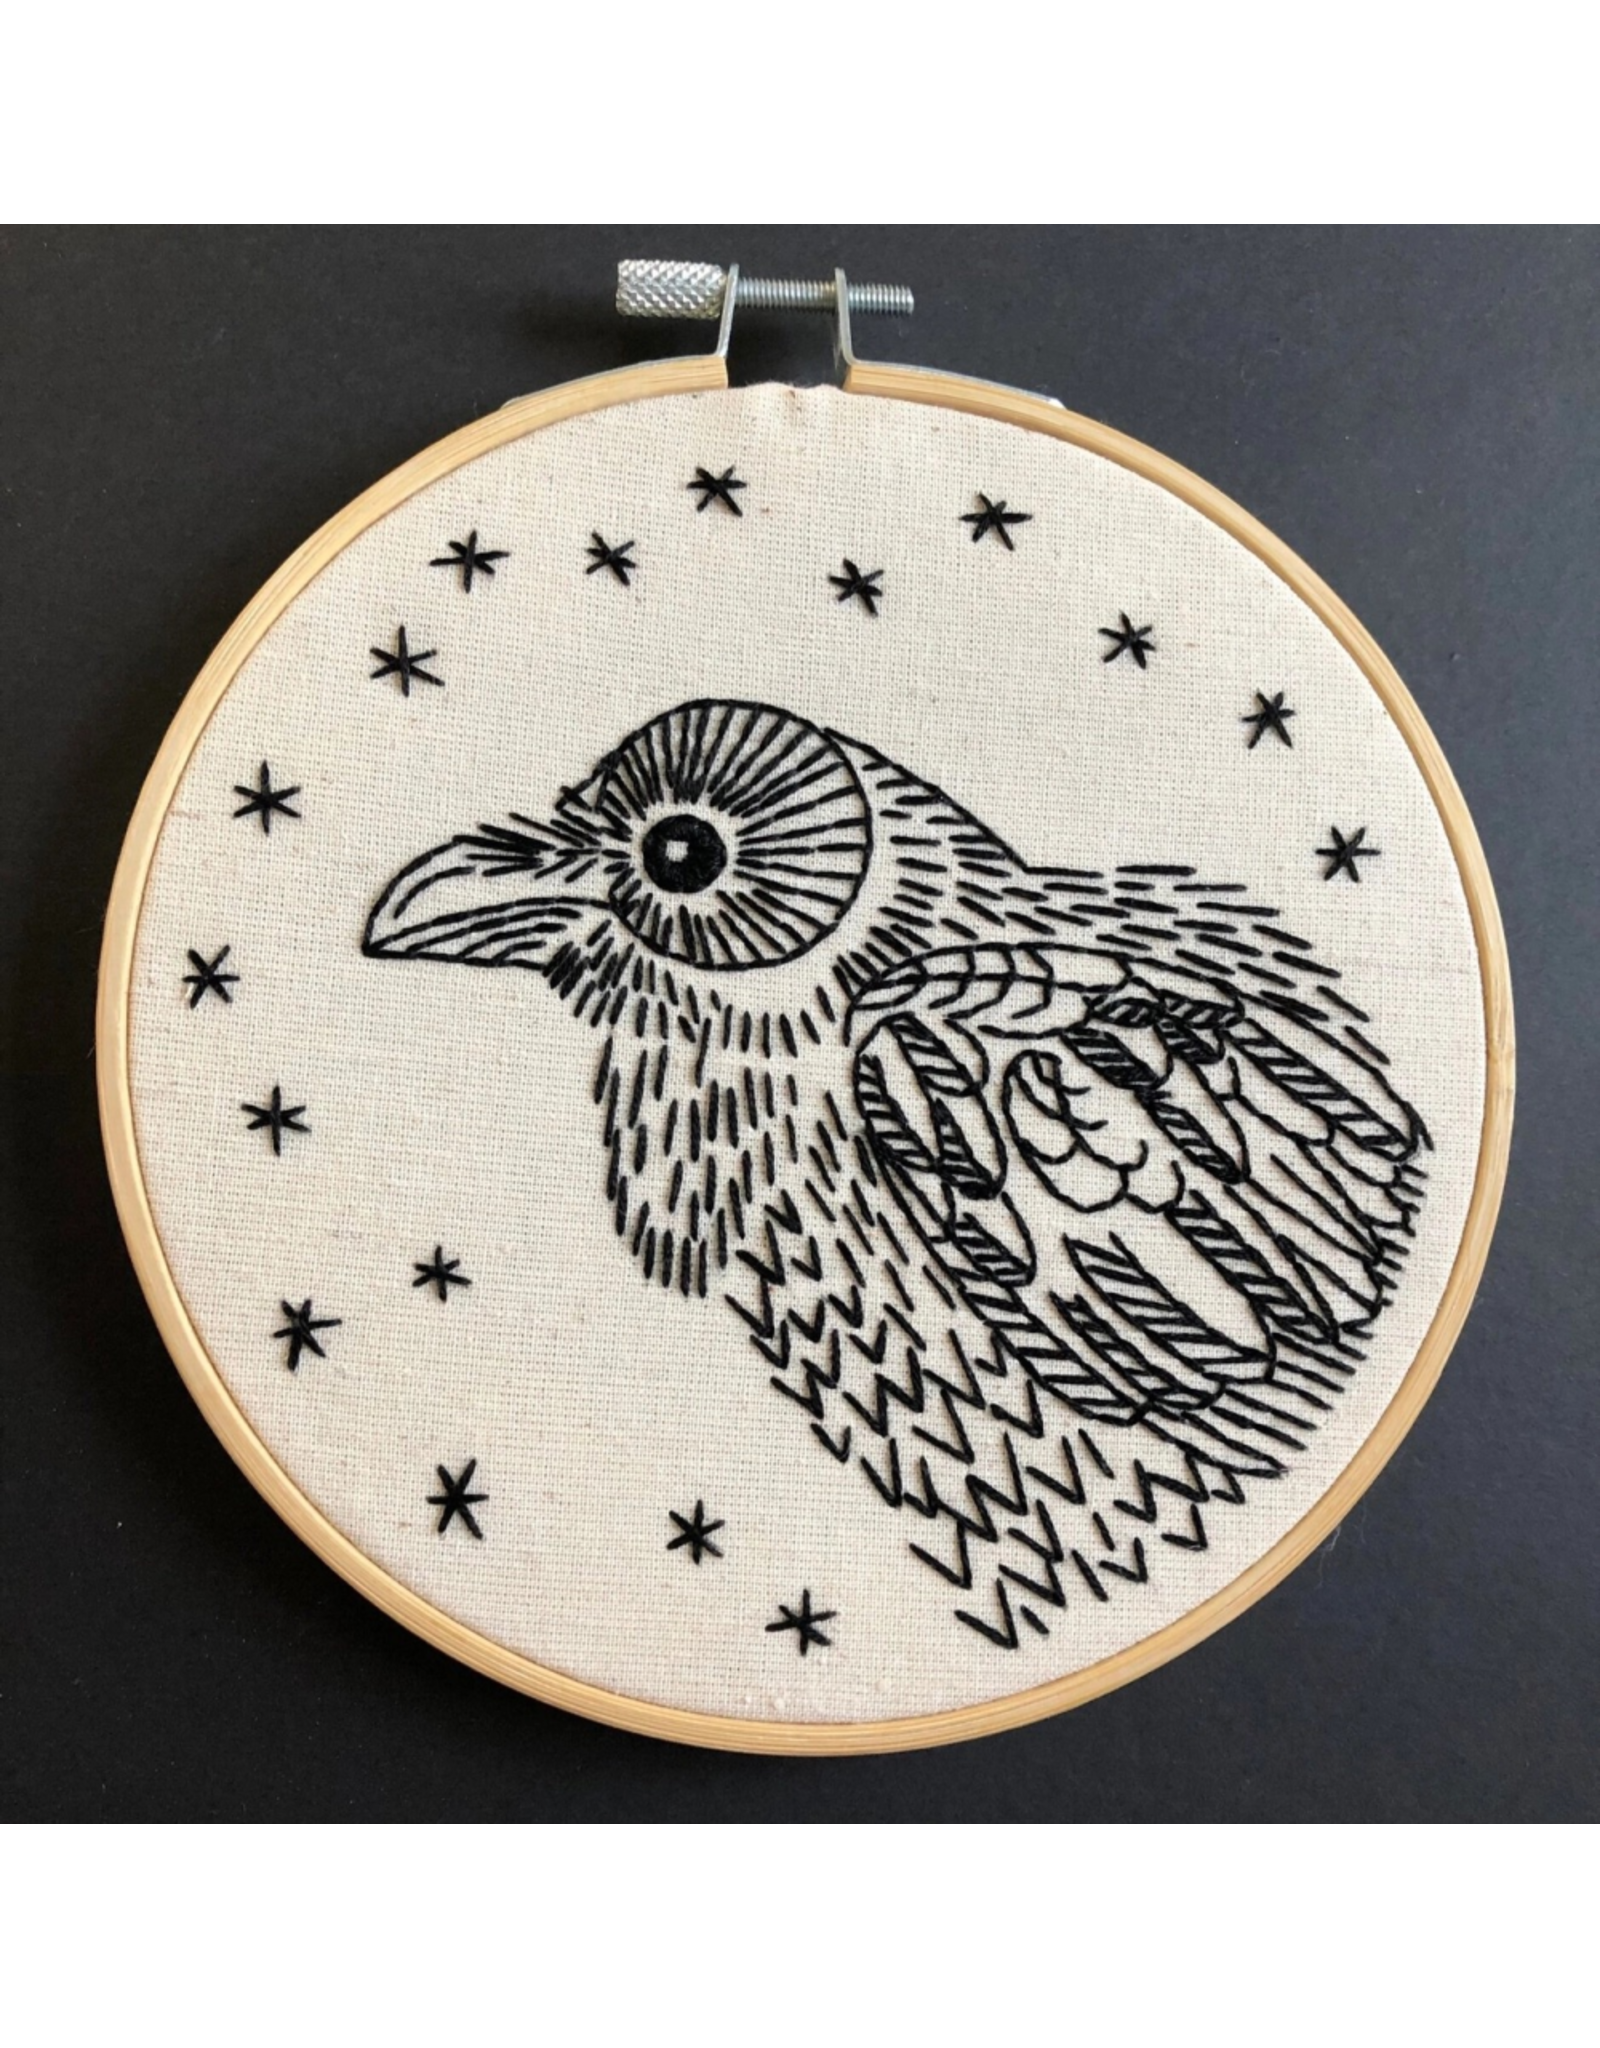 Hook, Line & Tinker Raven Nevermore, Embroidery Kit